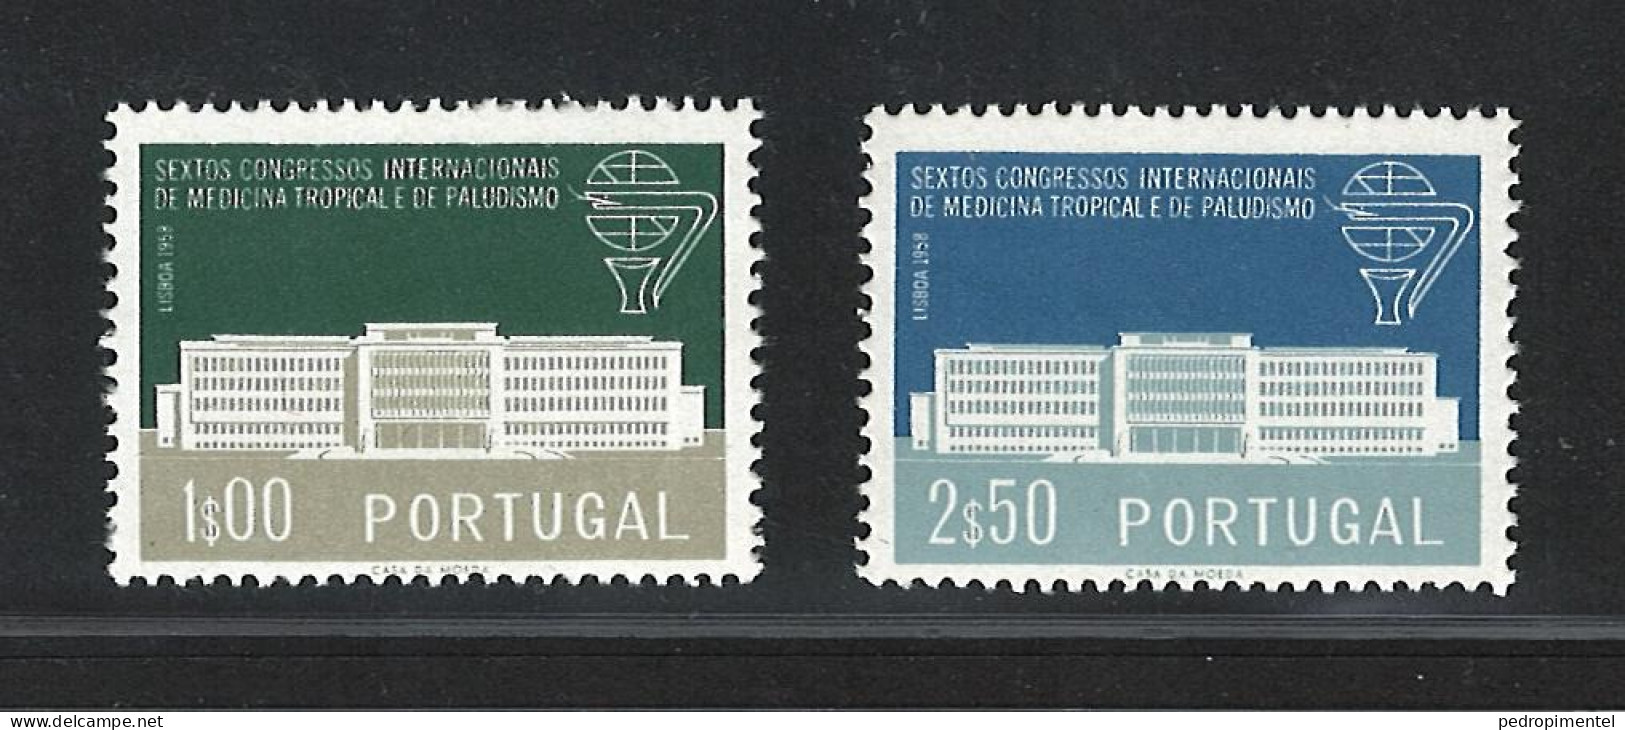 Portugal Stamps 1958 "Tropical Medicine Congress" Condition MNH #839-840 - Unused Stamps